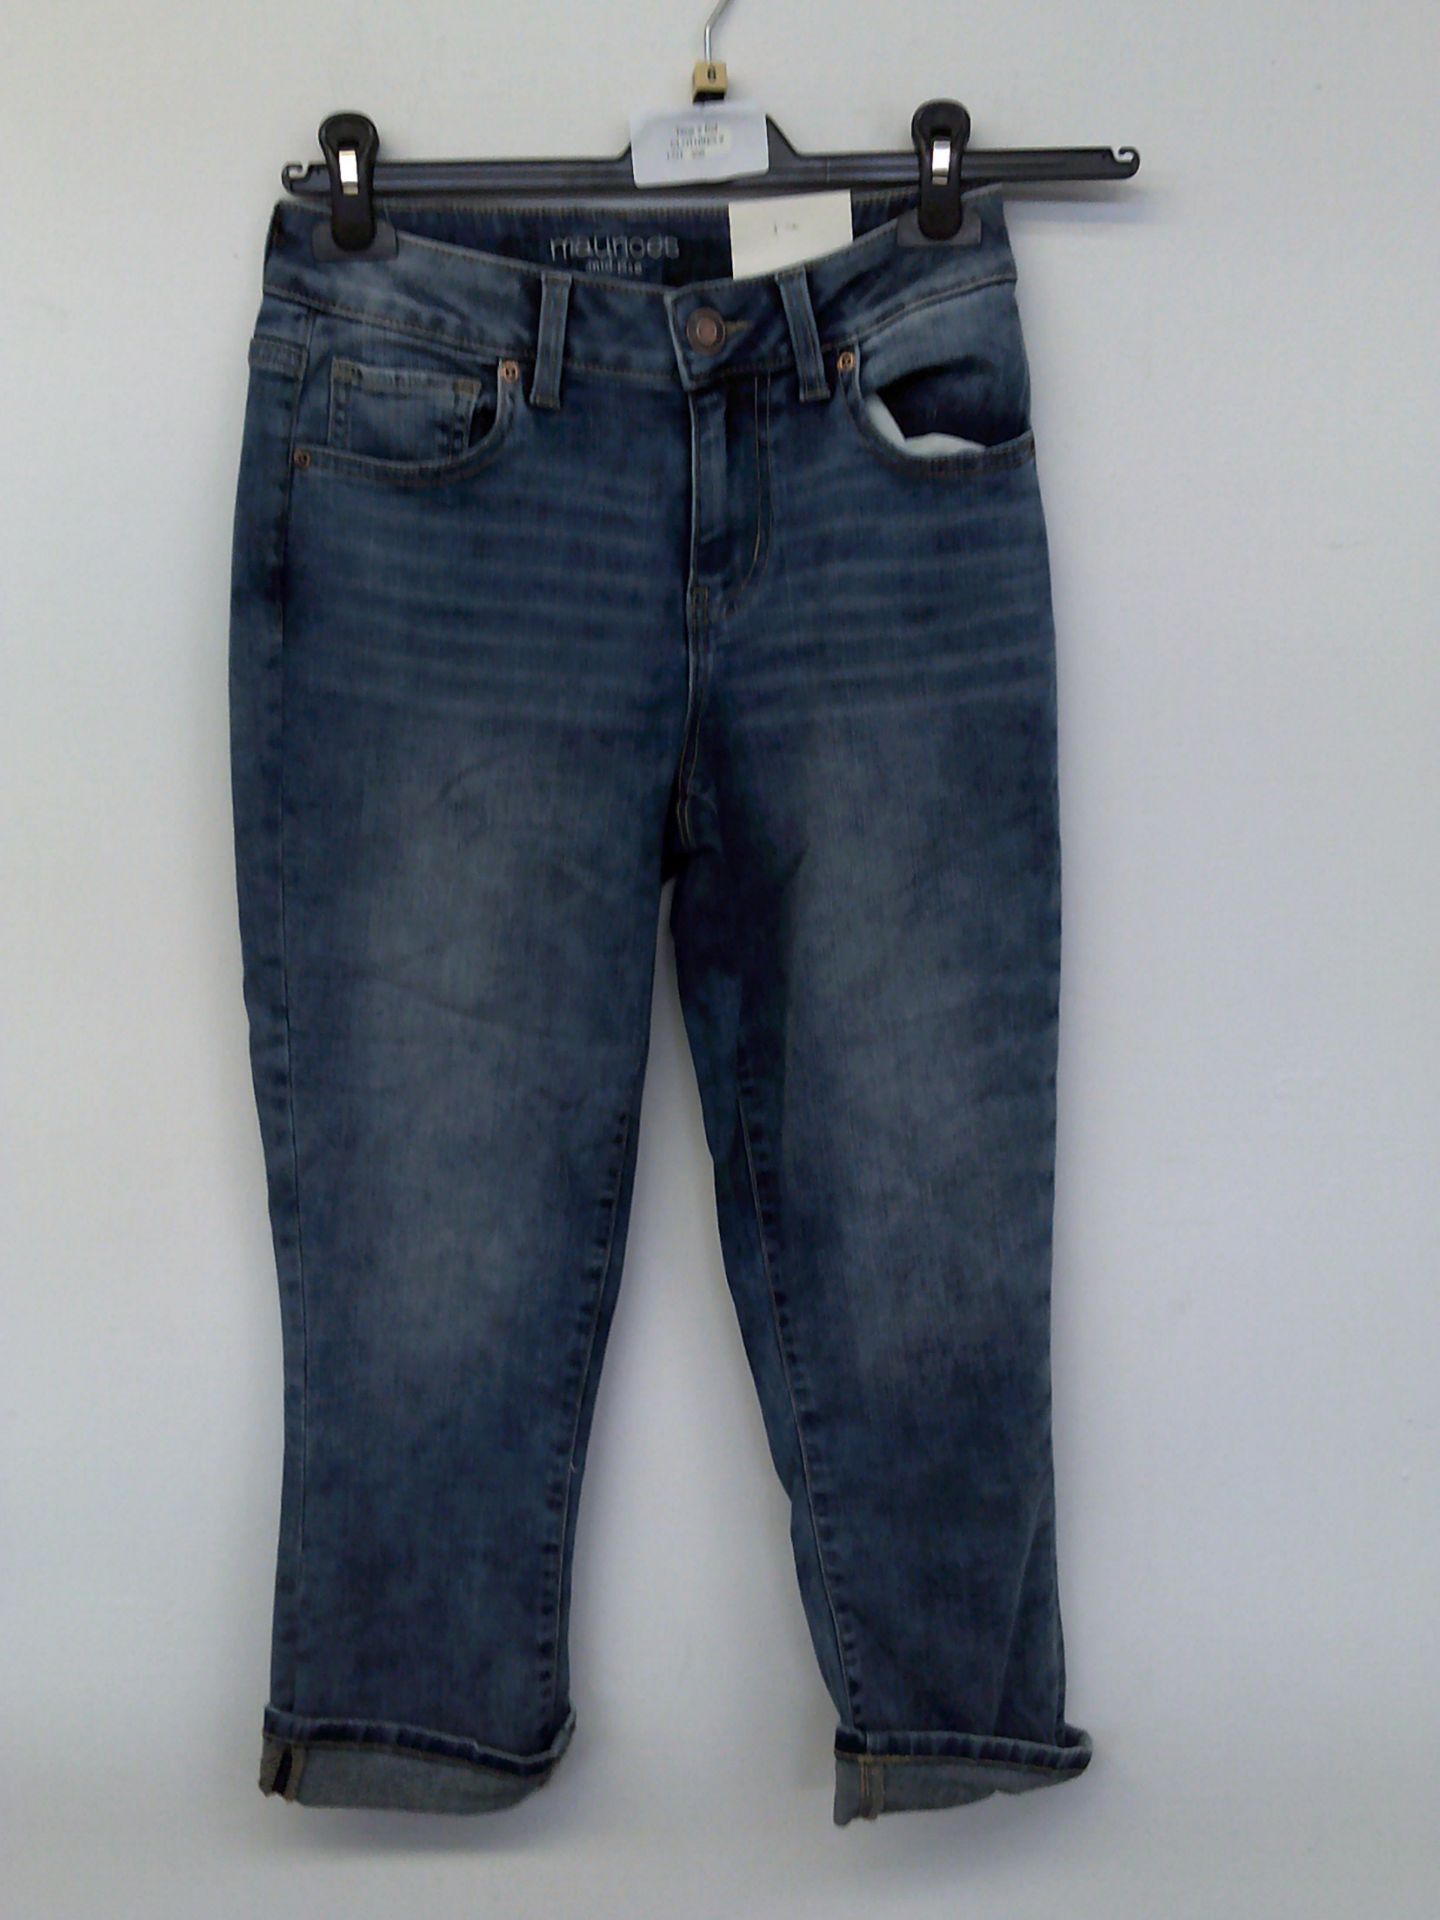 MAURICE 3/4 JEANS SIZE 6